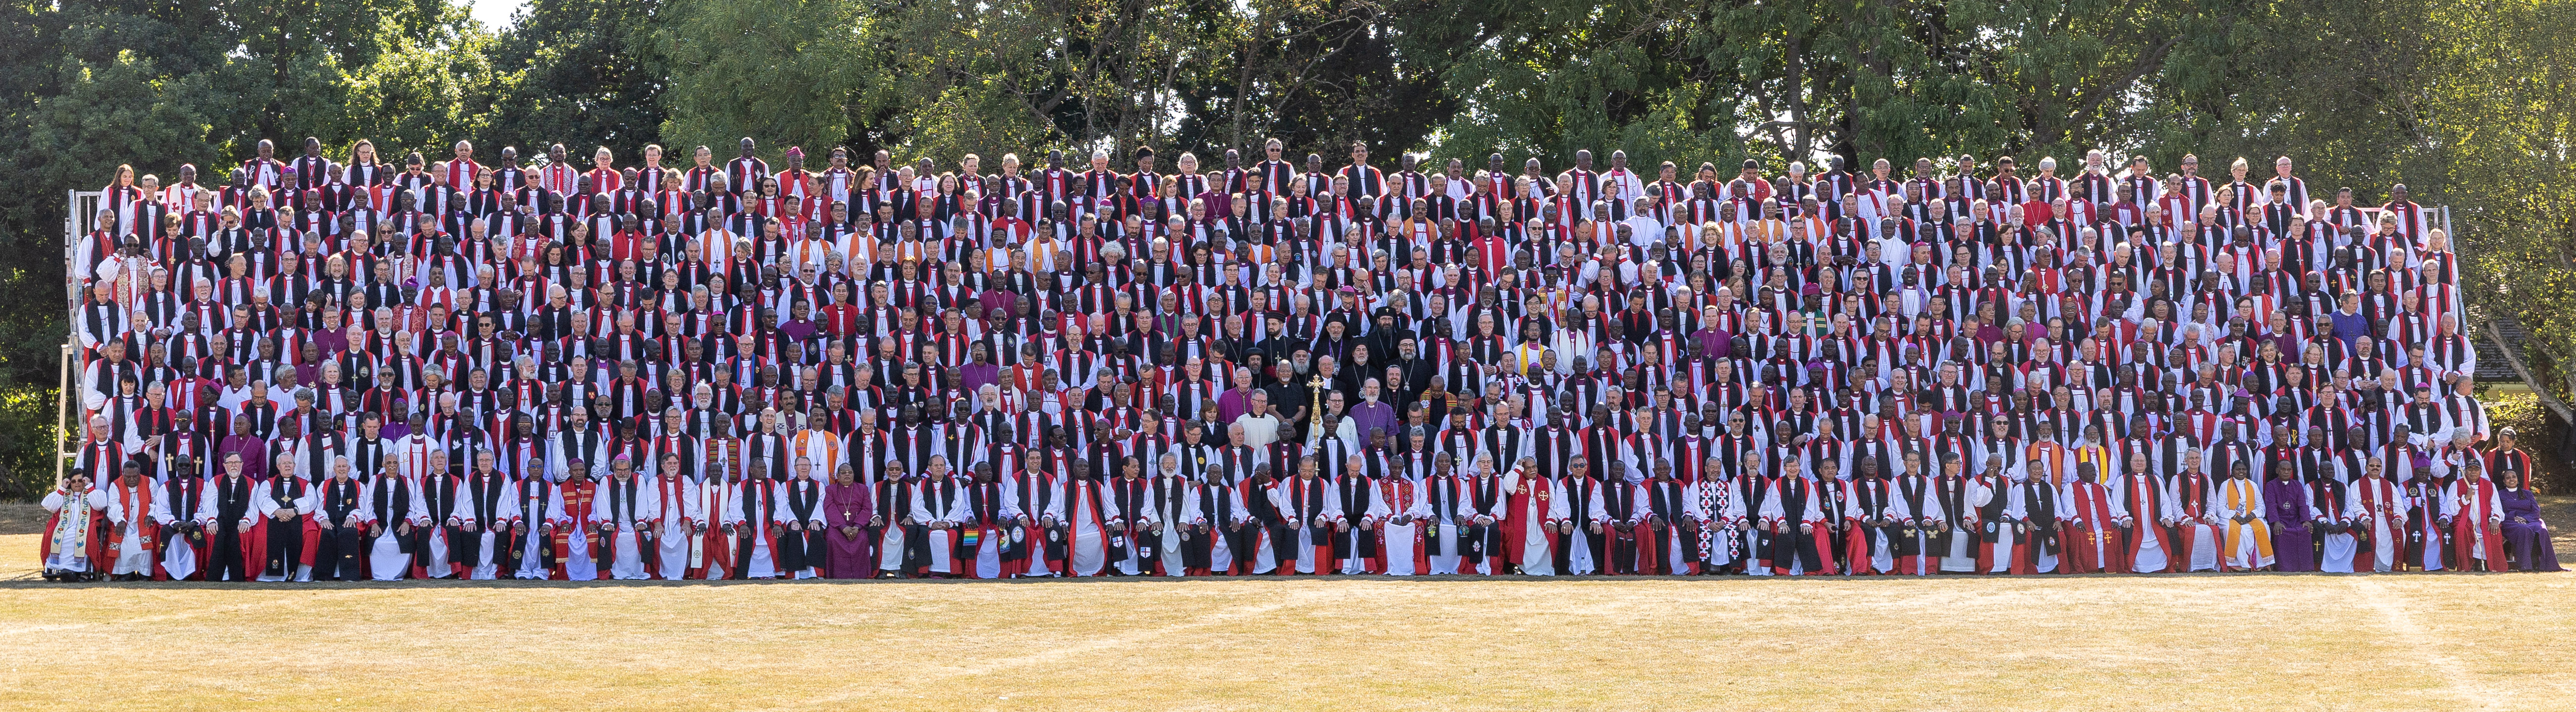 The Anglican Bishops and guests attending the Lambeth Conference pose for their group photograph during the 2022 Lambeth Conference at the University of Kent in Canterbury, United Kingdom